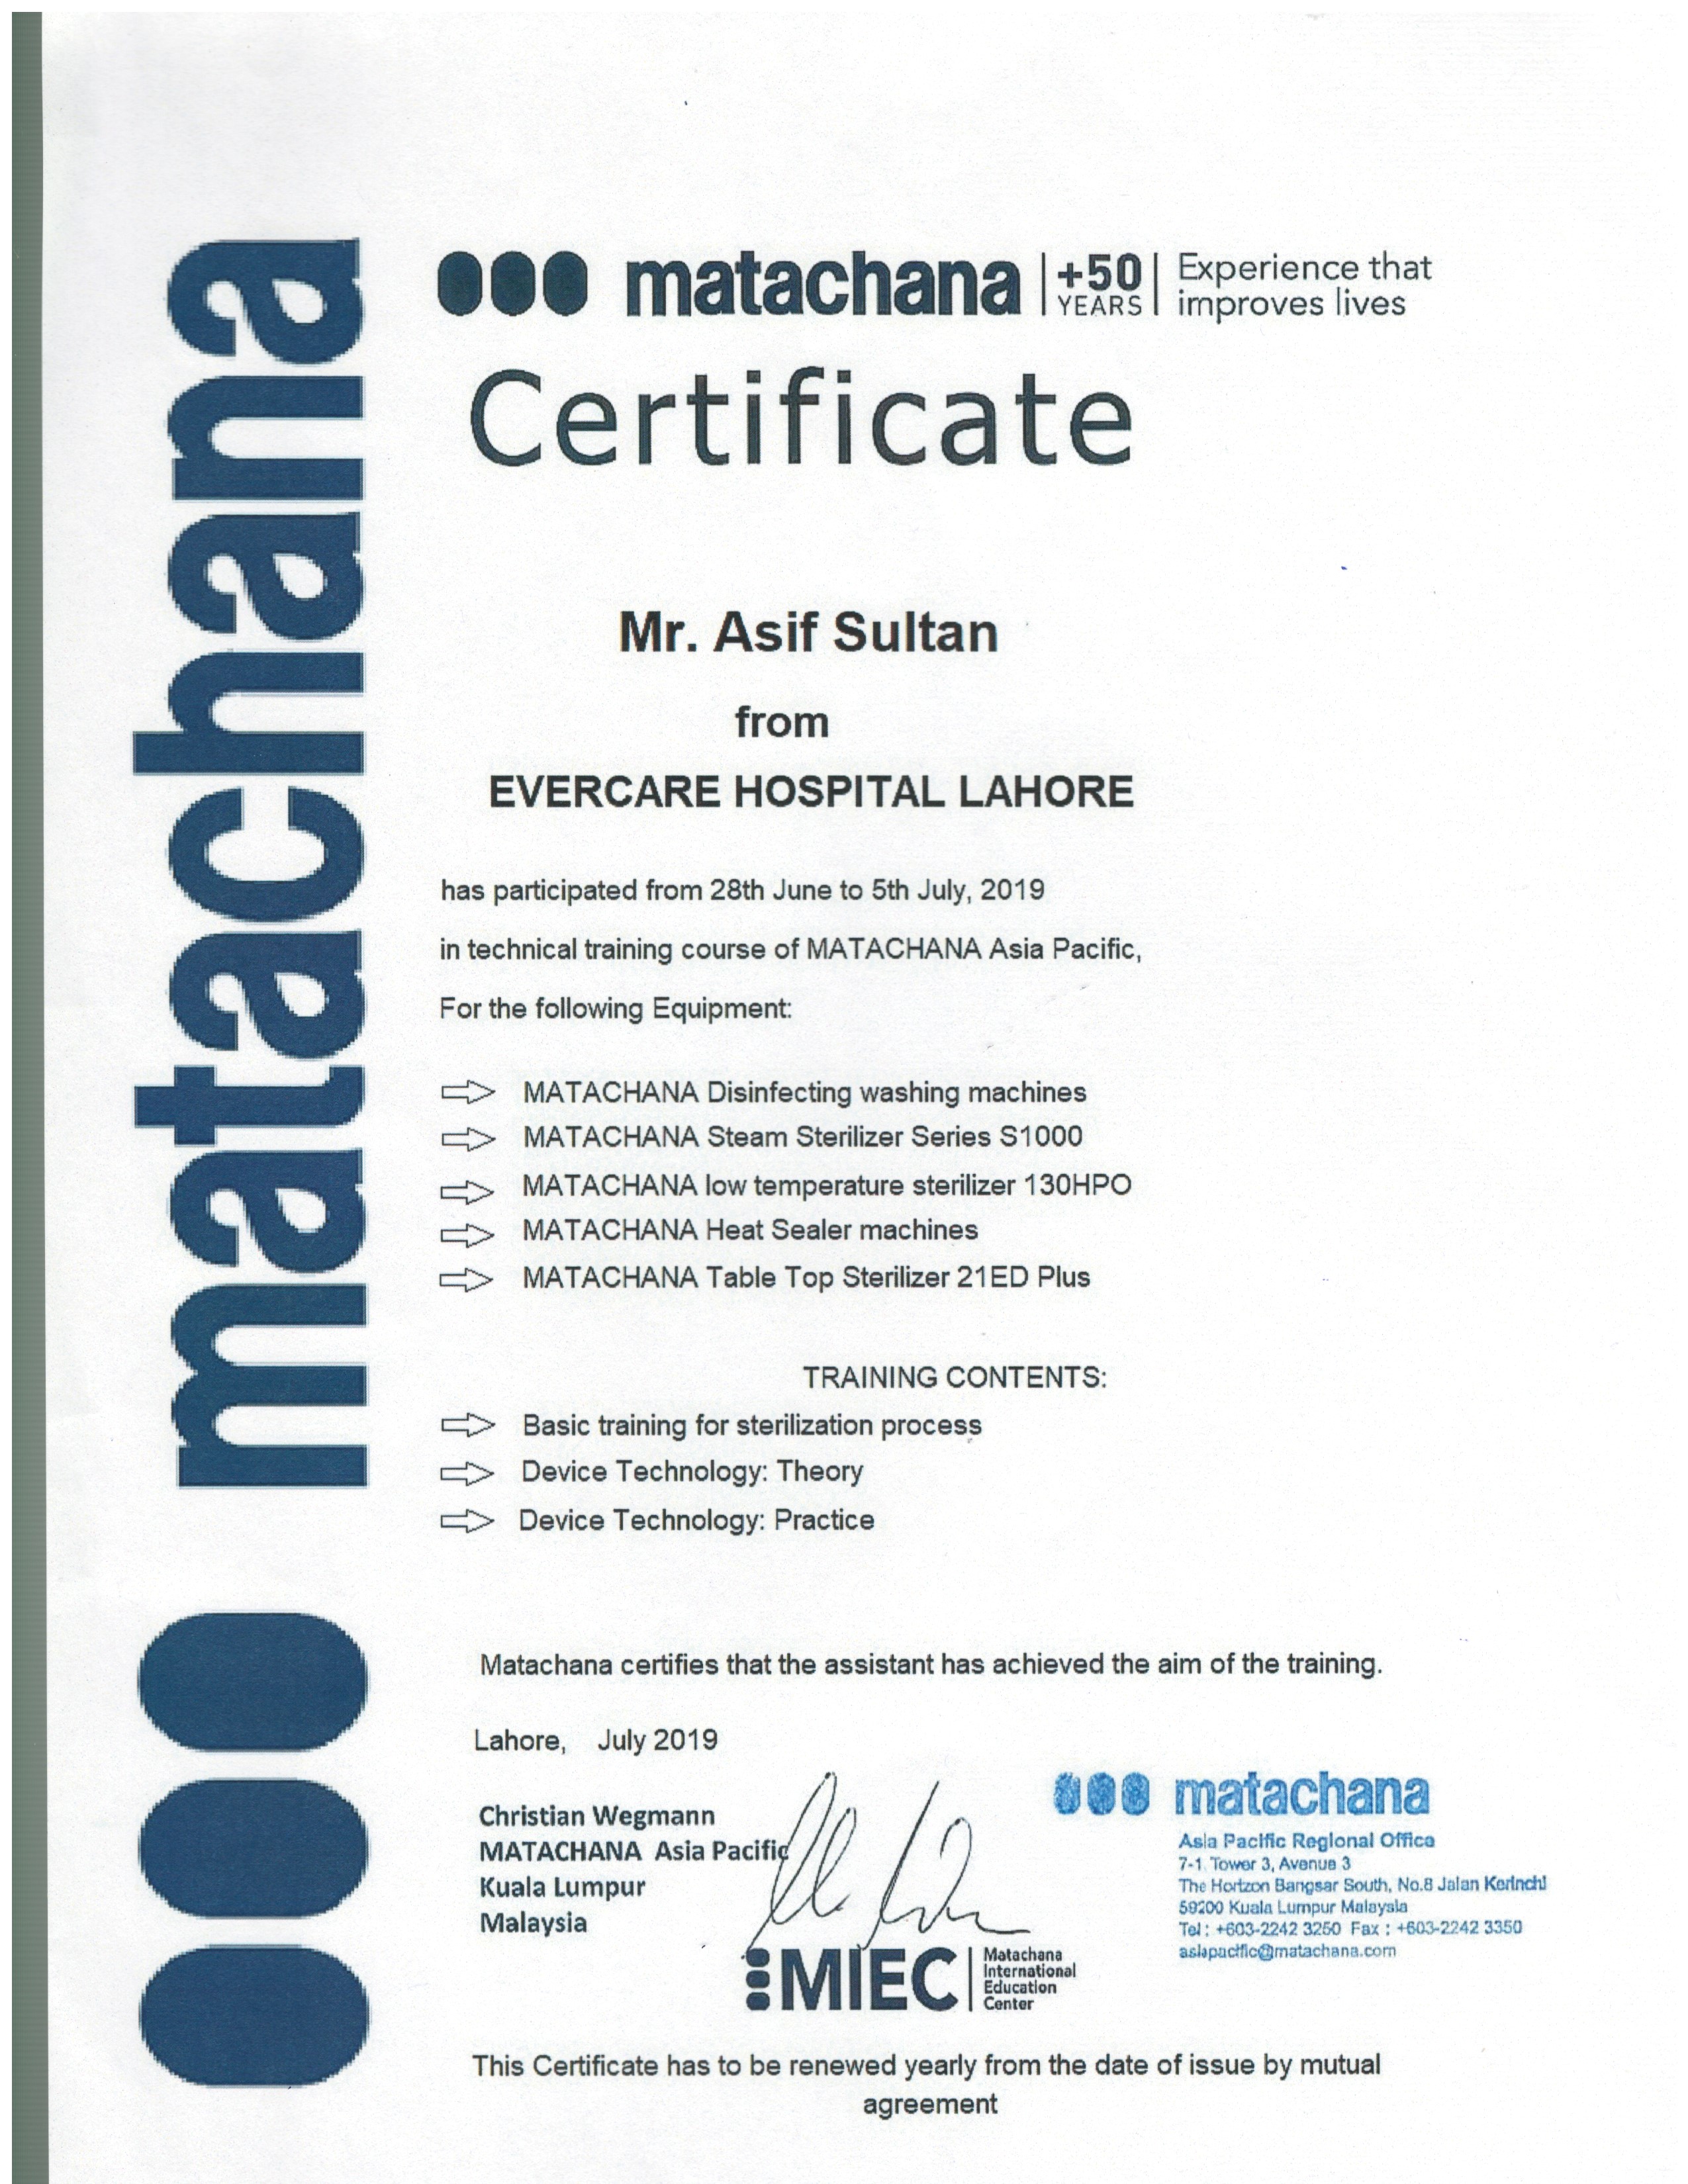 000 matachana

000 matachana +39] foenence o
Certificate

Mr. Asif Sultan

from
EVERCARE HOSPITAL LAHORE

has participated from 28th June to 5th July, 2019
in technical training course of MATACHANA Asia Pacific,

For the following Equipment:

MATACHANA Disinfecting washing machines
MATACHANA Steam Sterilizer Series S1000
MATACHANA low temperature sterilizer 130HPO
MATACHANA Heat Sealer machines
MATACHANA Table Top Sterilizer 21ED Plus

WOU Y

TRAINING CONTENTS:
Basic training for sterilization process
Device Technology: Theory

00d

Device Technology: Practice

Matachana certifies that the assistant has achieved the aim of the training.

Lahore, July 2019

Christian Wegmann / : i &amp; 8 matachana

Asla Pacific Reglonal Offica
MATACHANA Asia Pacifi / a
Kuala Lumpur The Horizon Bangsar South, No.8 Jalan Kerinch!
59200 Kuala Lumpur Malaysia
Malaysia py, ED Tol: +603-2242 3250 Fax ; +603-2242 3360
Matachana ashpactfic@matachana.com
@ International
Education
@ Center

 

This Certificate has to be renewed yearly from the date of issue by mutual
agreement